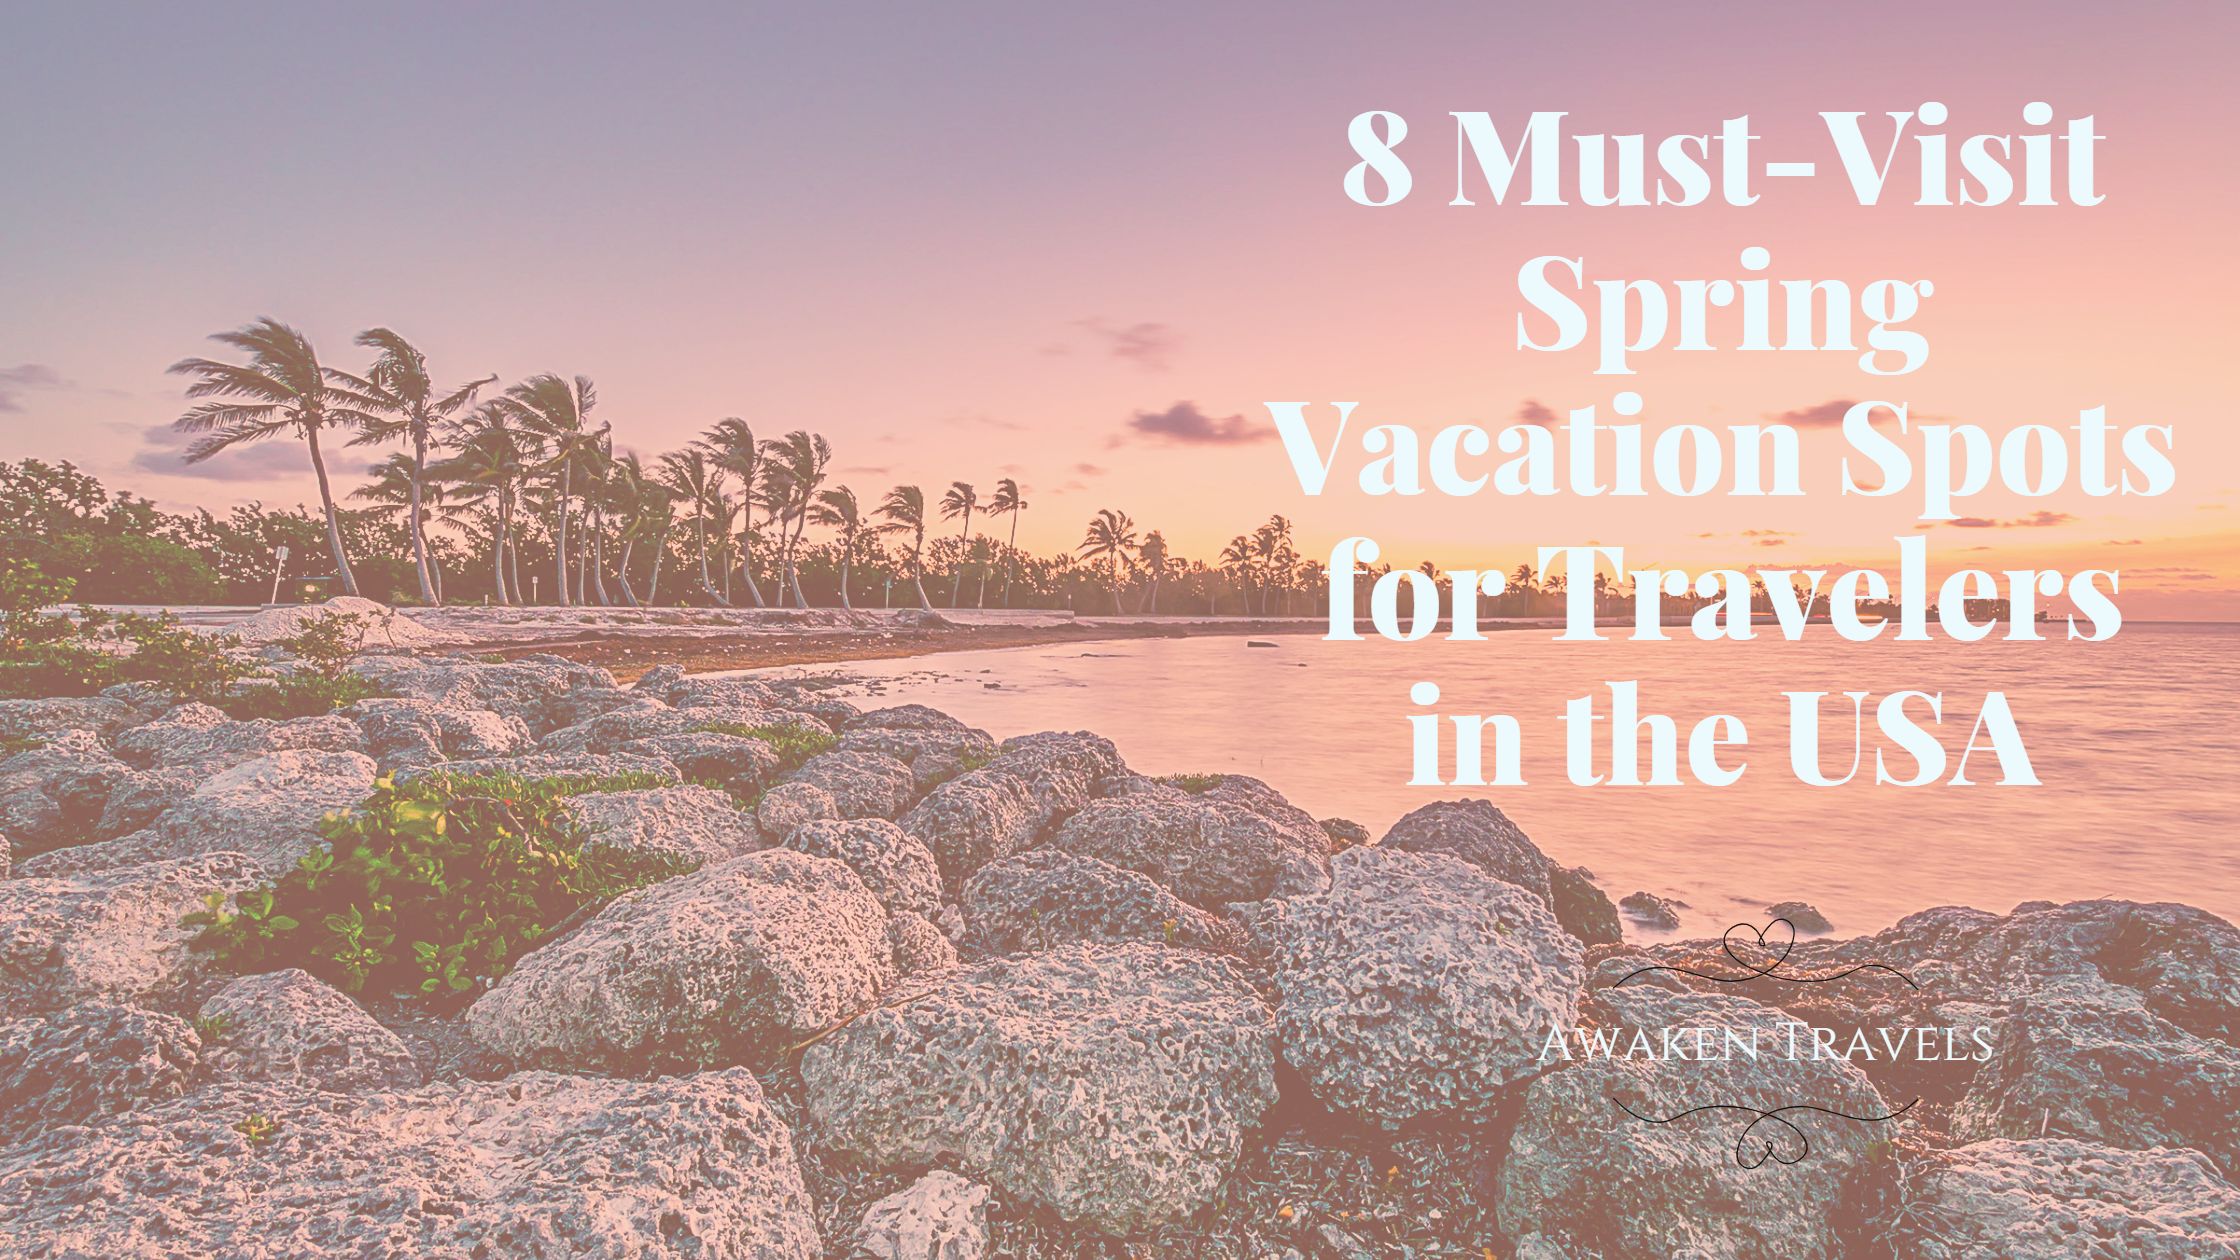 8 Must-Visit Spring Vacation Spots for Travelers in the USA